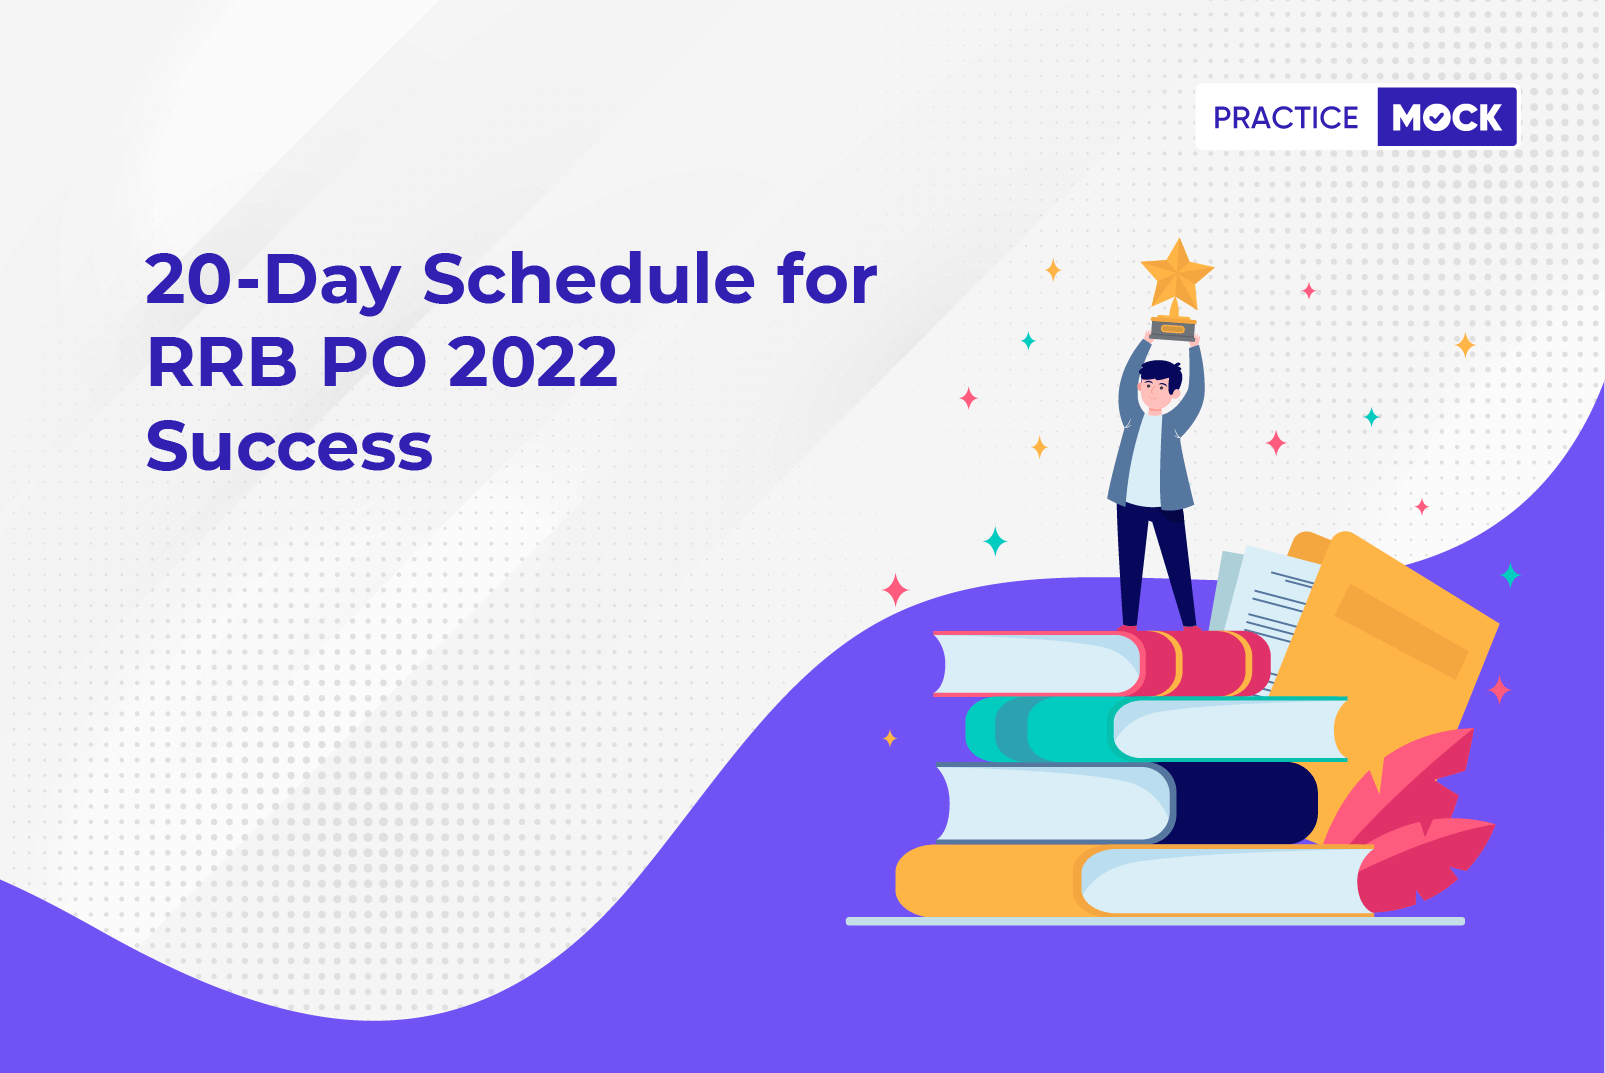 20-Day Schedule for RRB PO 2022 Success